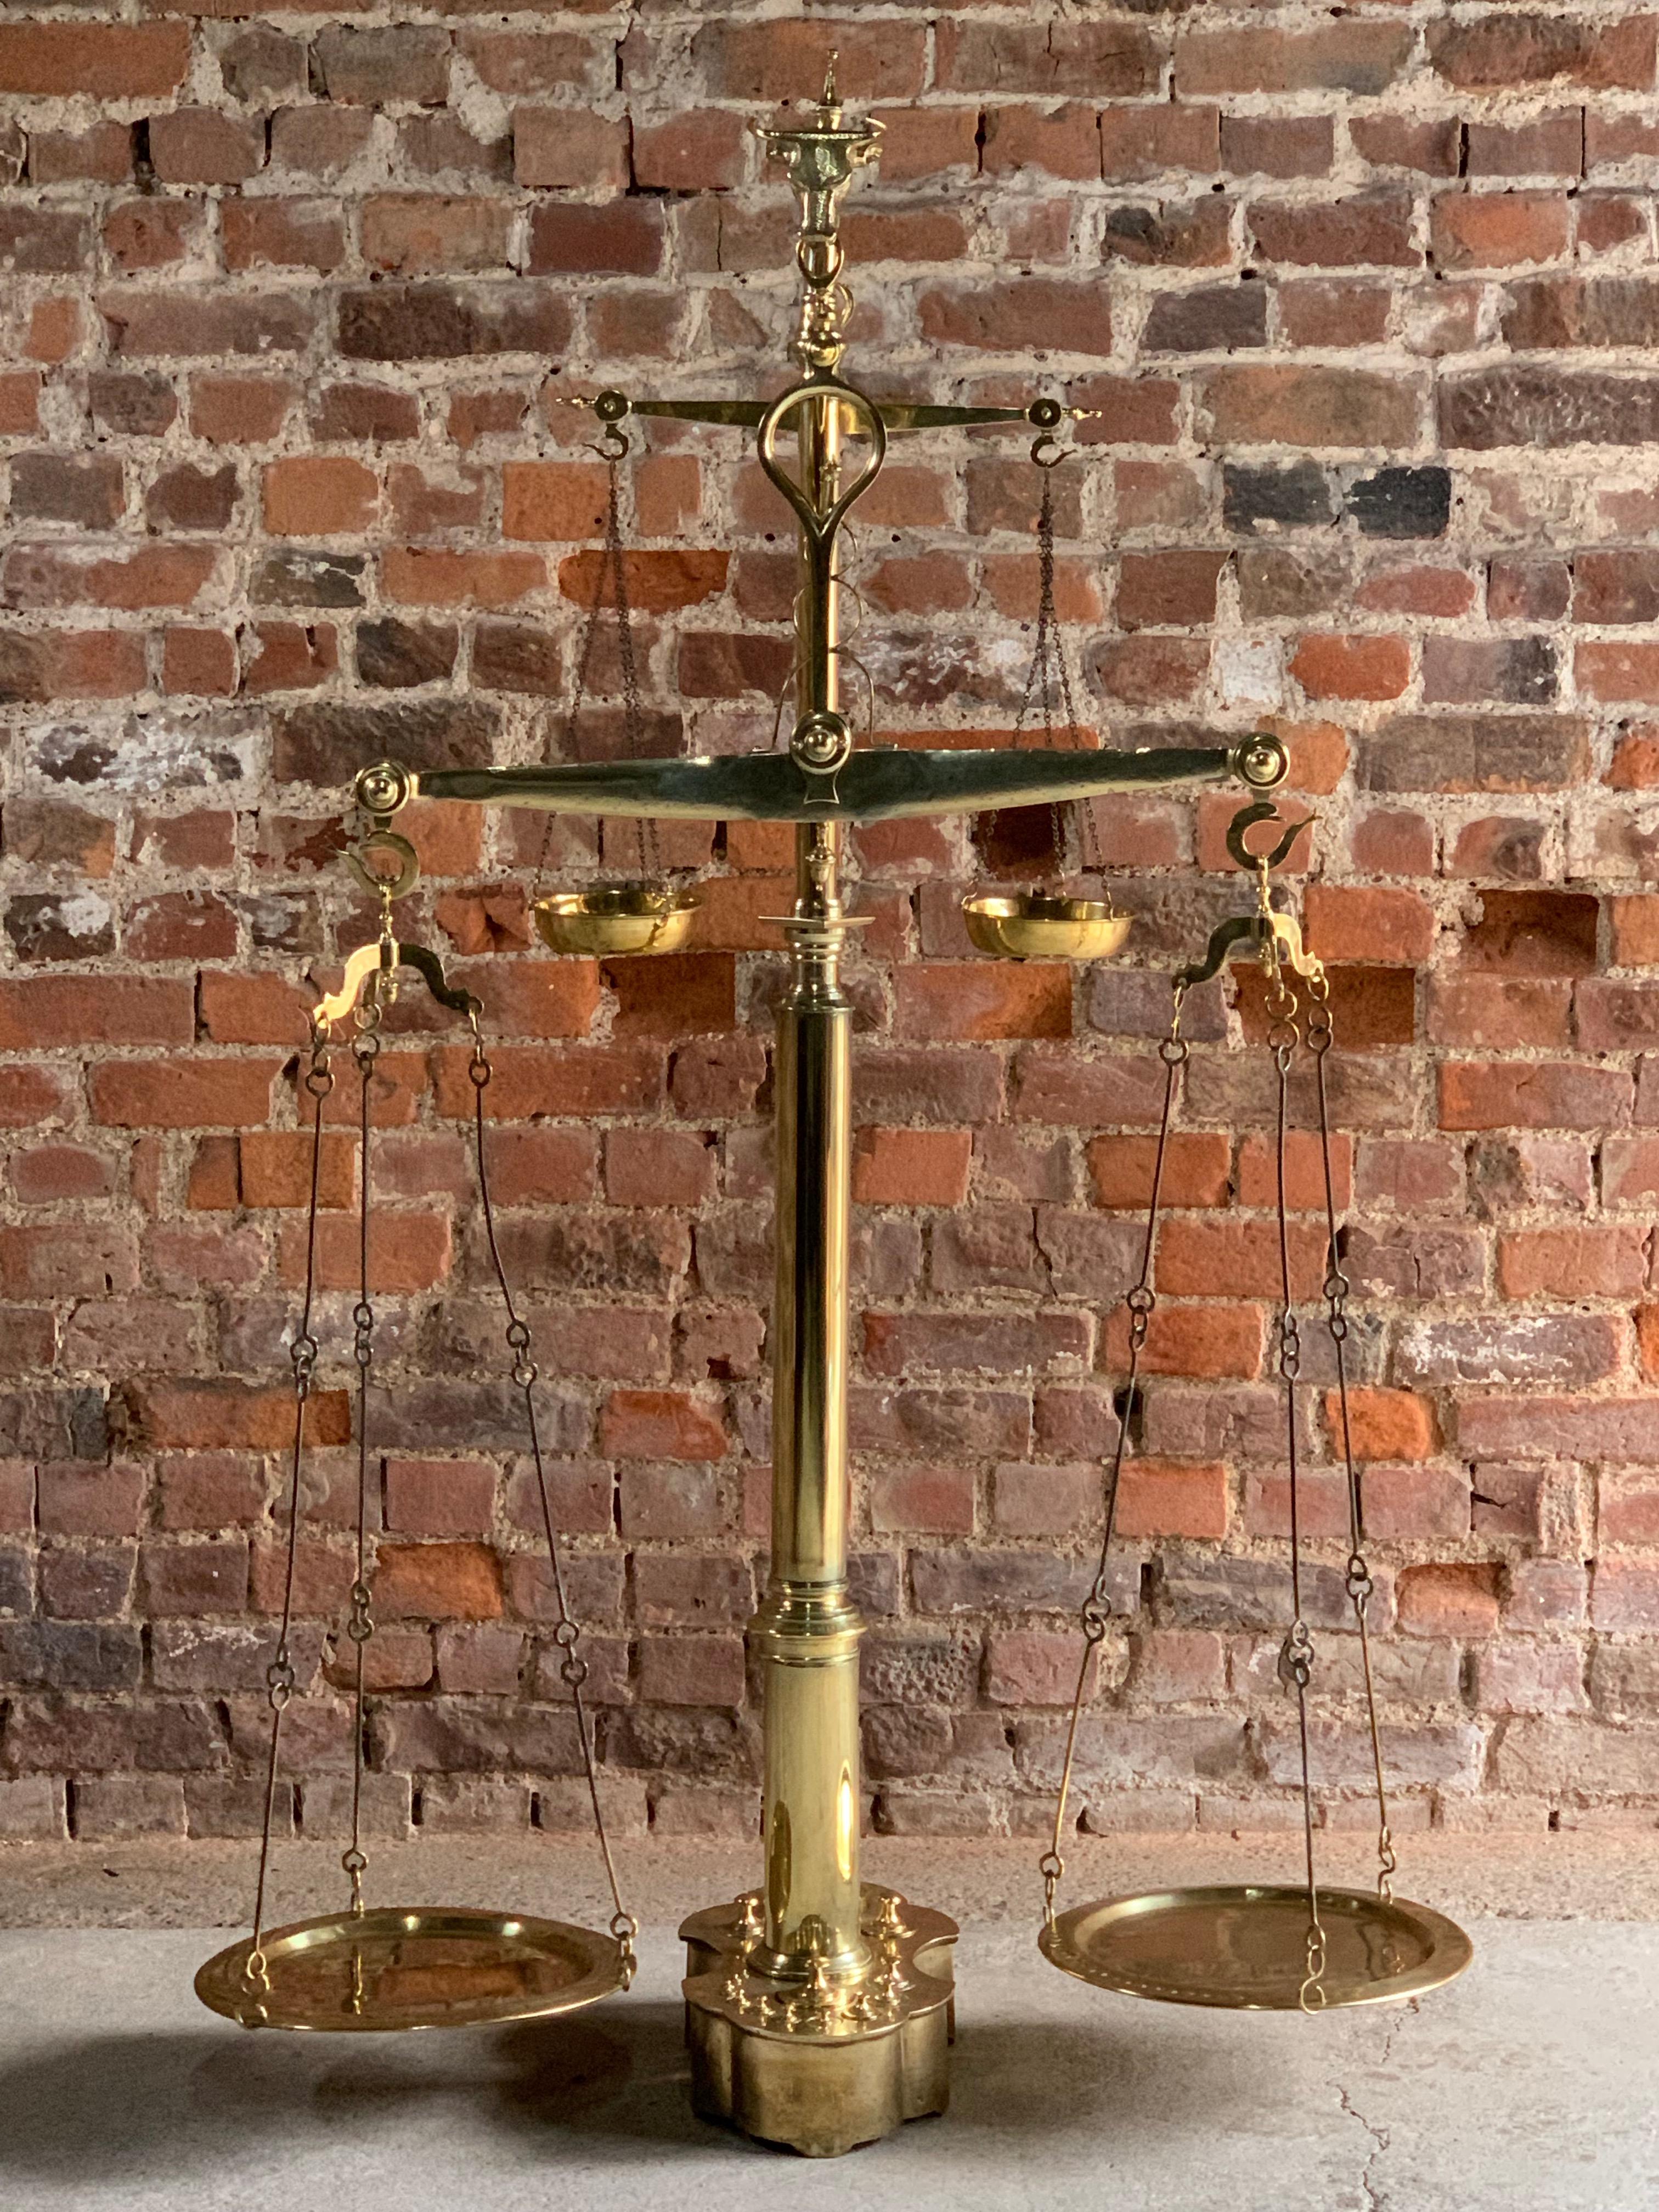 Magnificent antique brass butchers scales 19th century Portuguese, circa 1890

A magnificent set of 19th century Portuguese solid brass butcher's scales, circa 1890, this monumental et of scales comes complete with its original set of 14